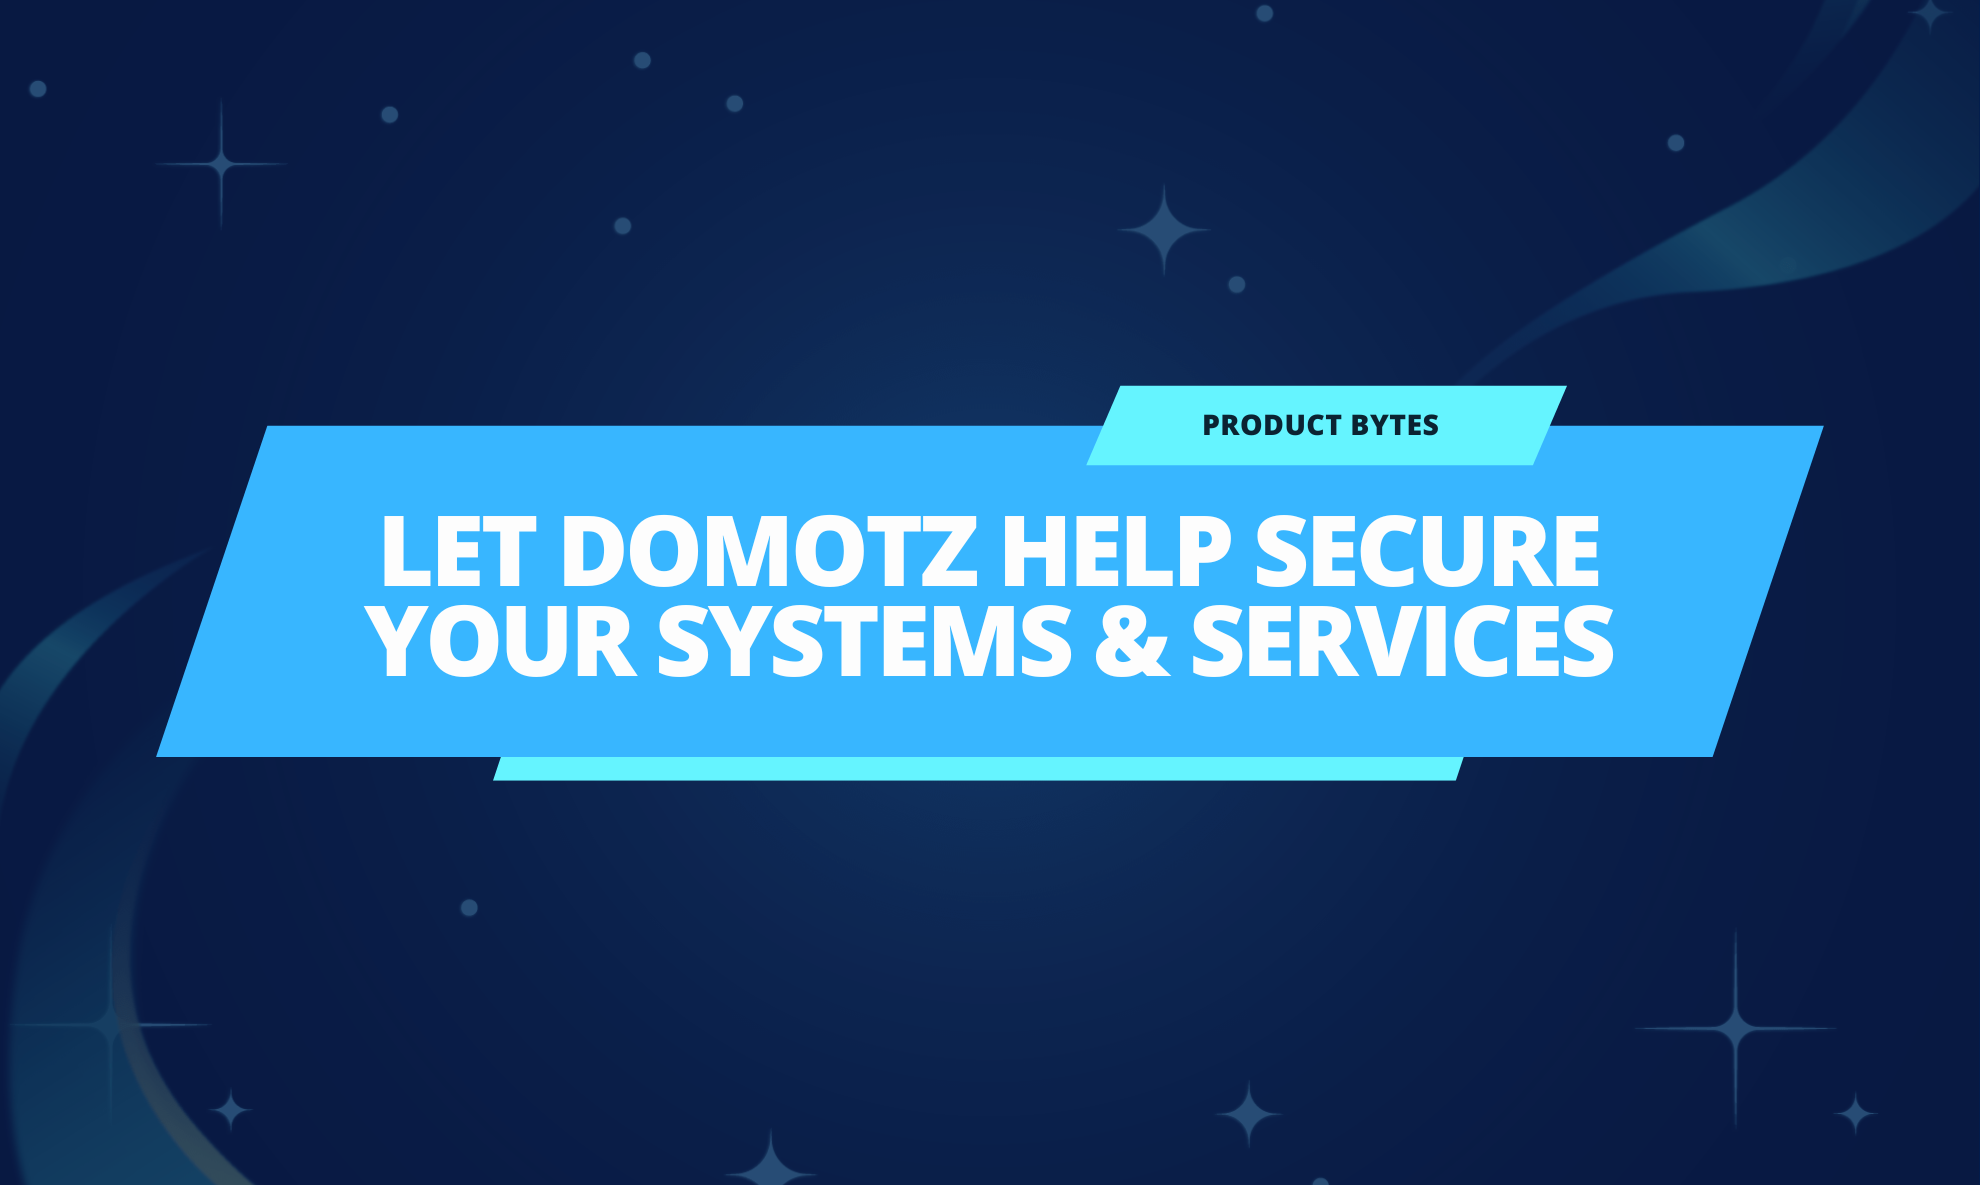 Don’t get hacker: Let Domotz help secure your systems and services.